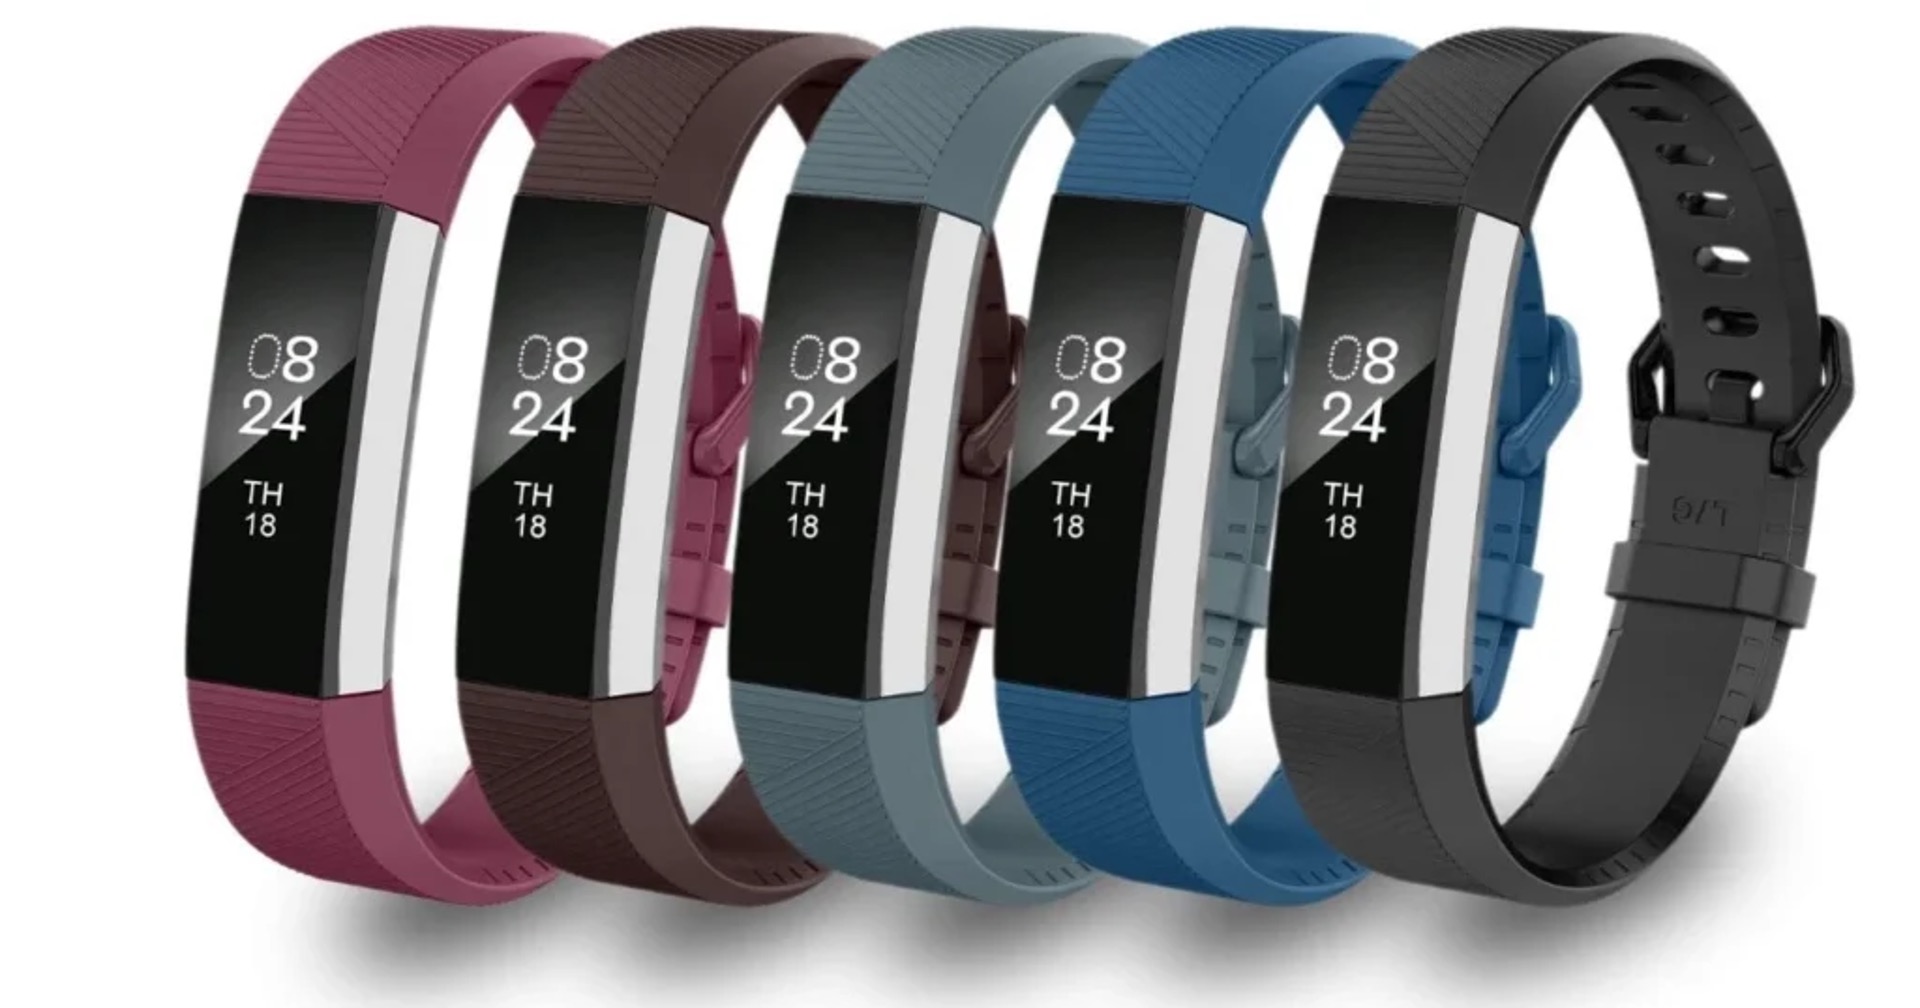 Revamping Style: A Step-by-Step Guide To Changing Charge 2 Fitbit Bands